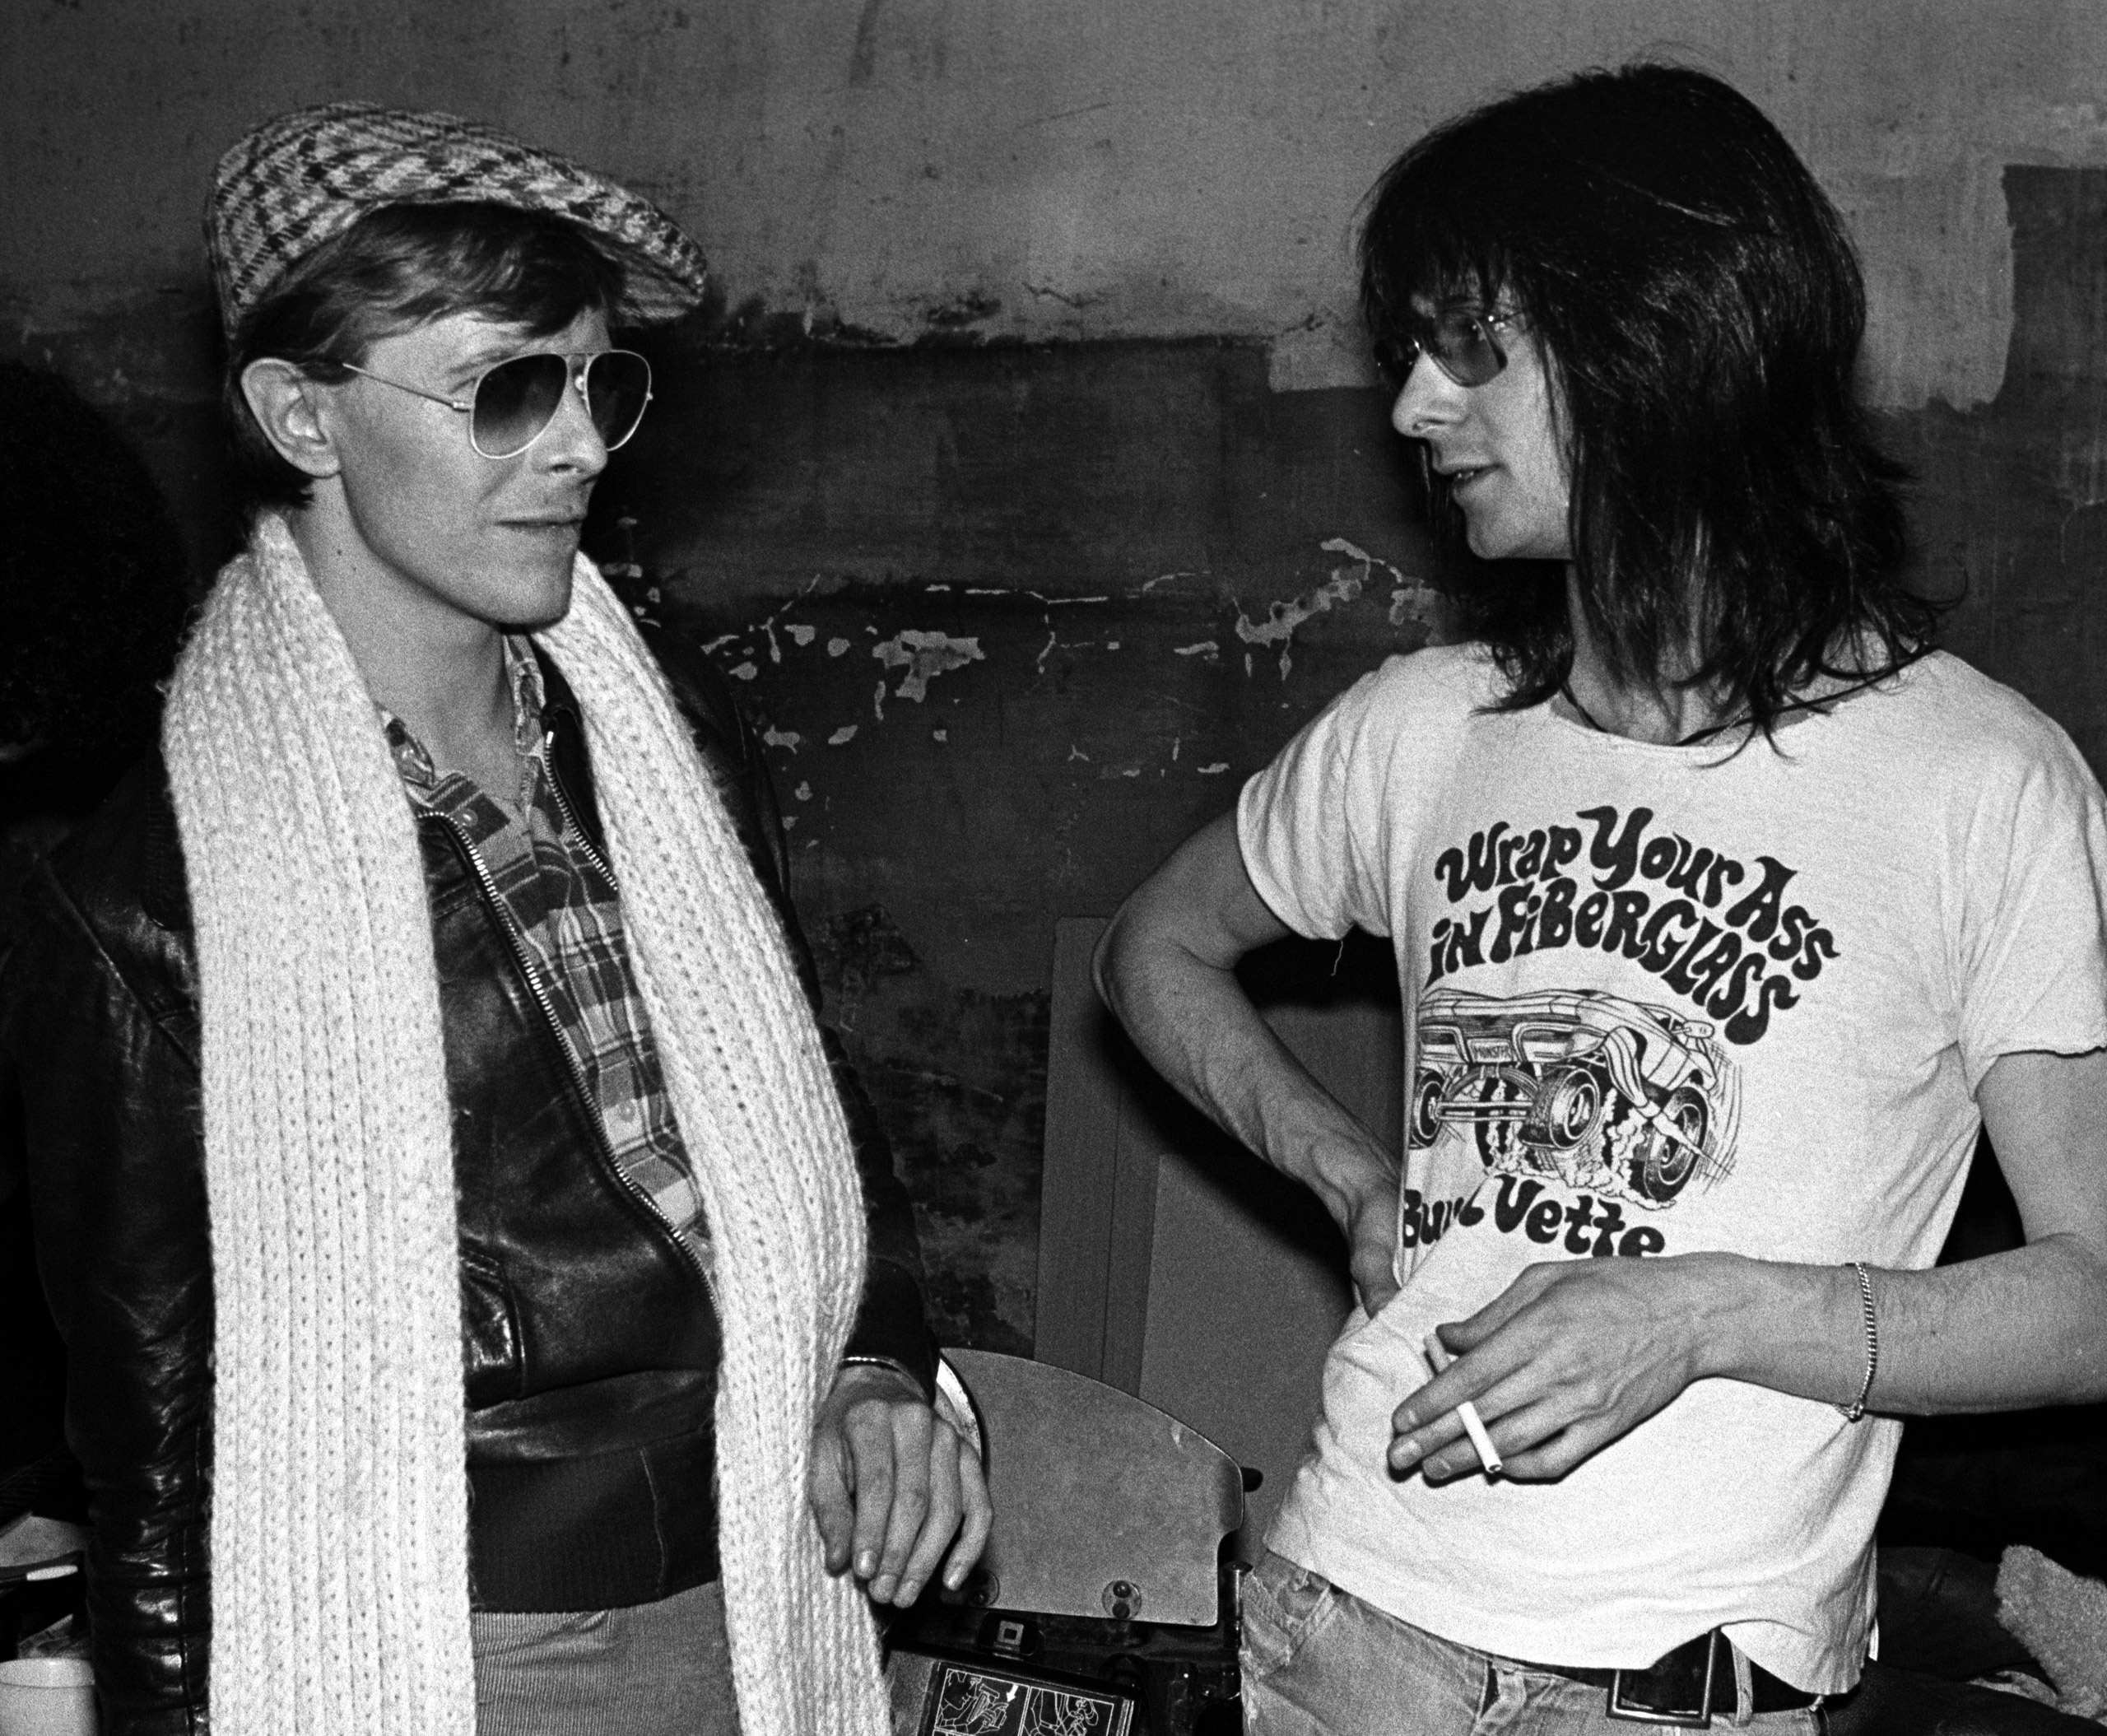 Lenny Kaye from the Patti Smith Group with David Bowie at CBGB's club in New York City on April 4 1975.